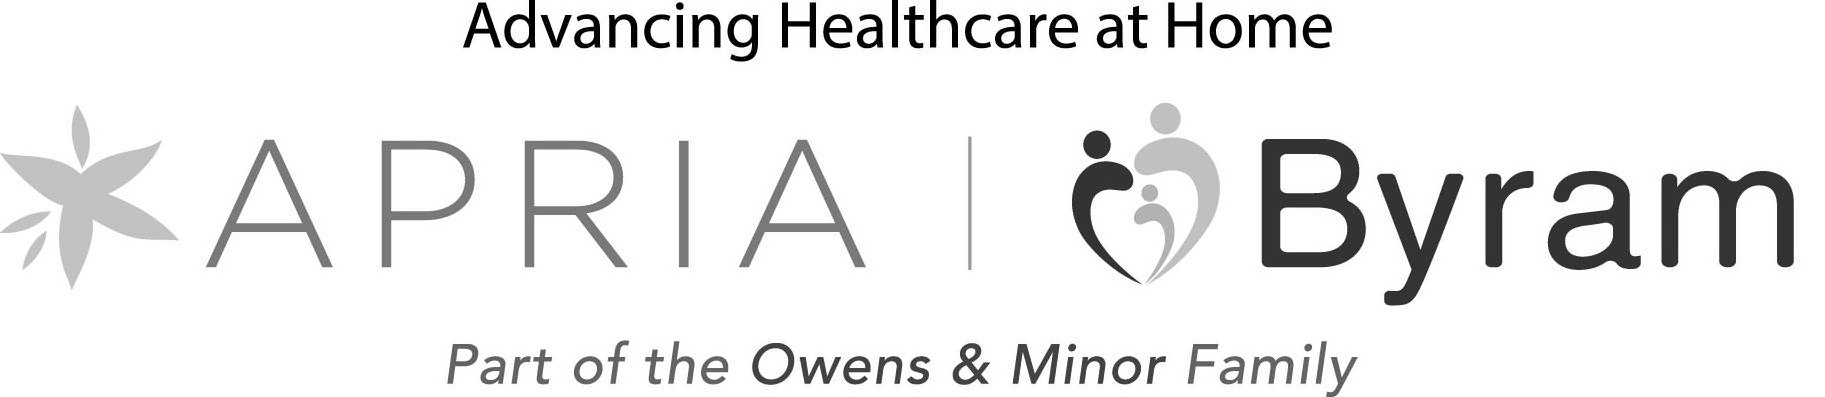  ADVANCING HEALTHCARE AT HOME APRIA BYRAM PART OF THE OWENS &amp; MINOR FAMILY